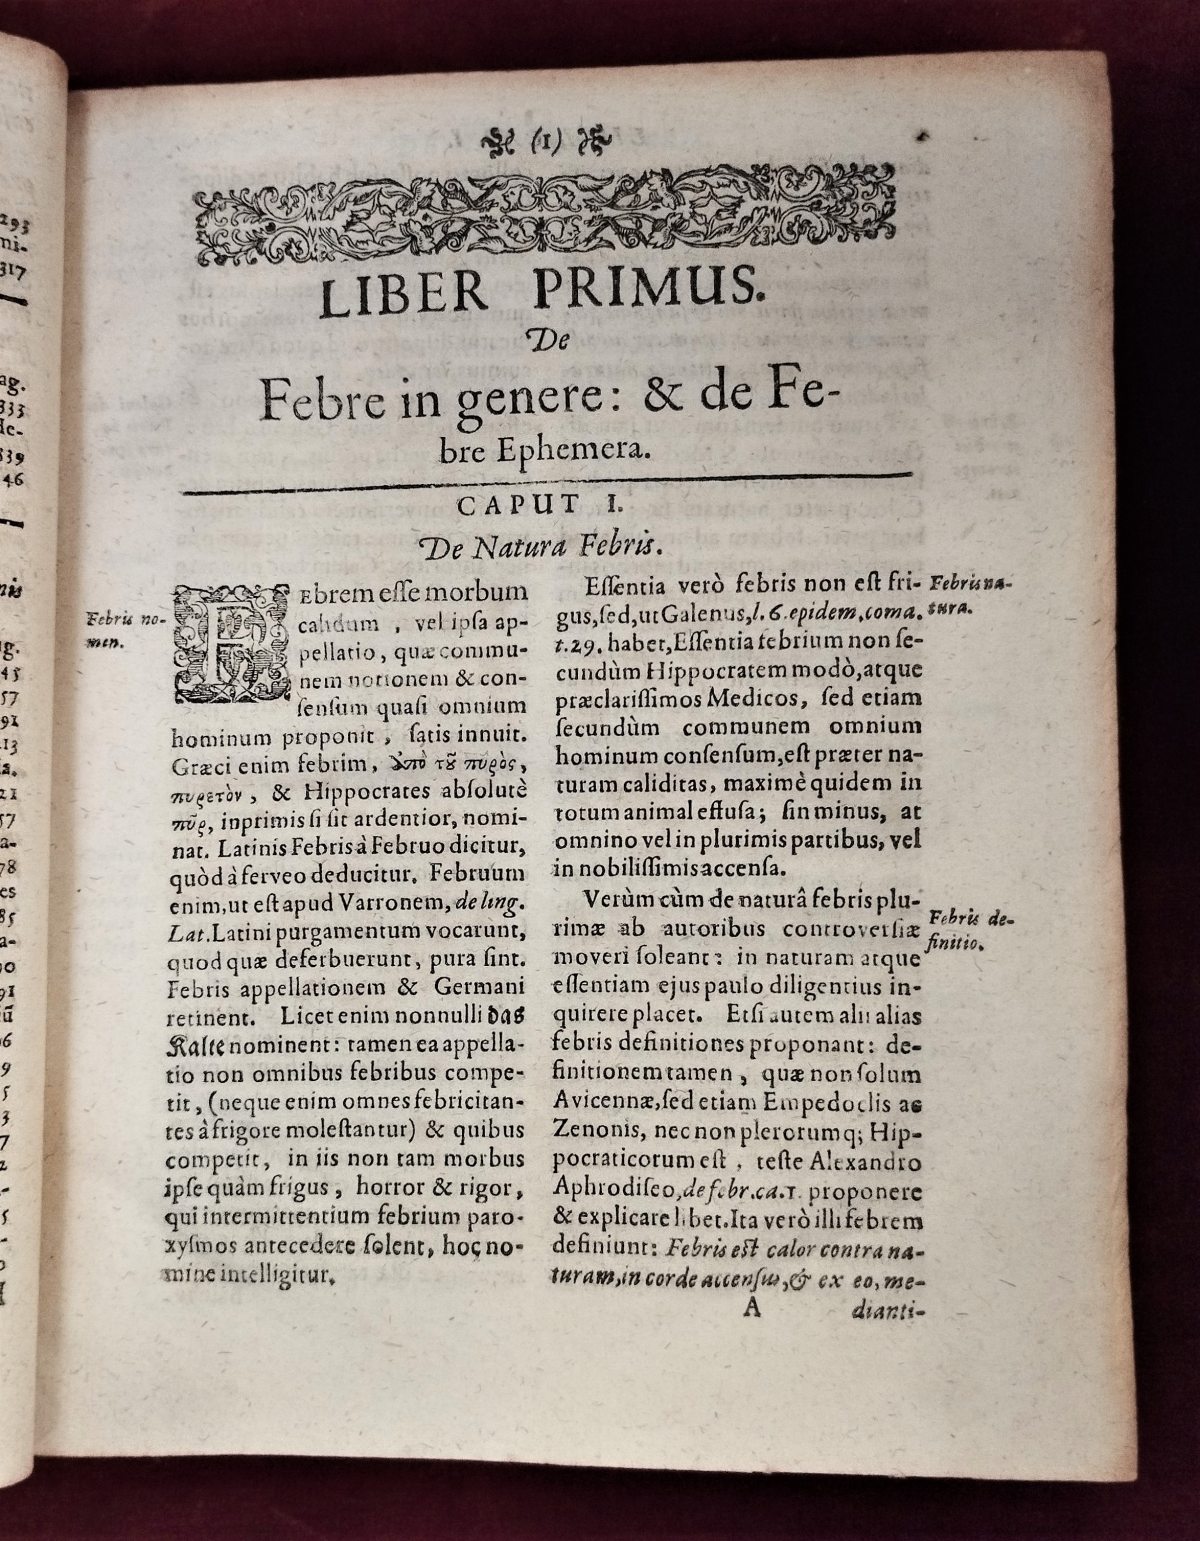 Page 1 in a 17th-century printed book, with a floral woodcut headpiece above a Latin text in two columns beginning with a decorative woodcut letter F.